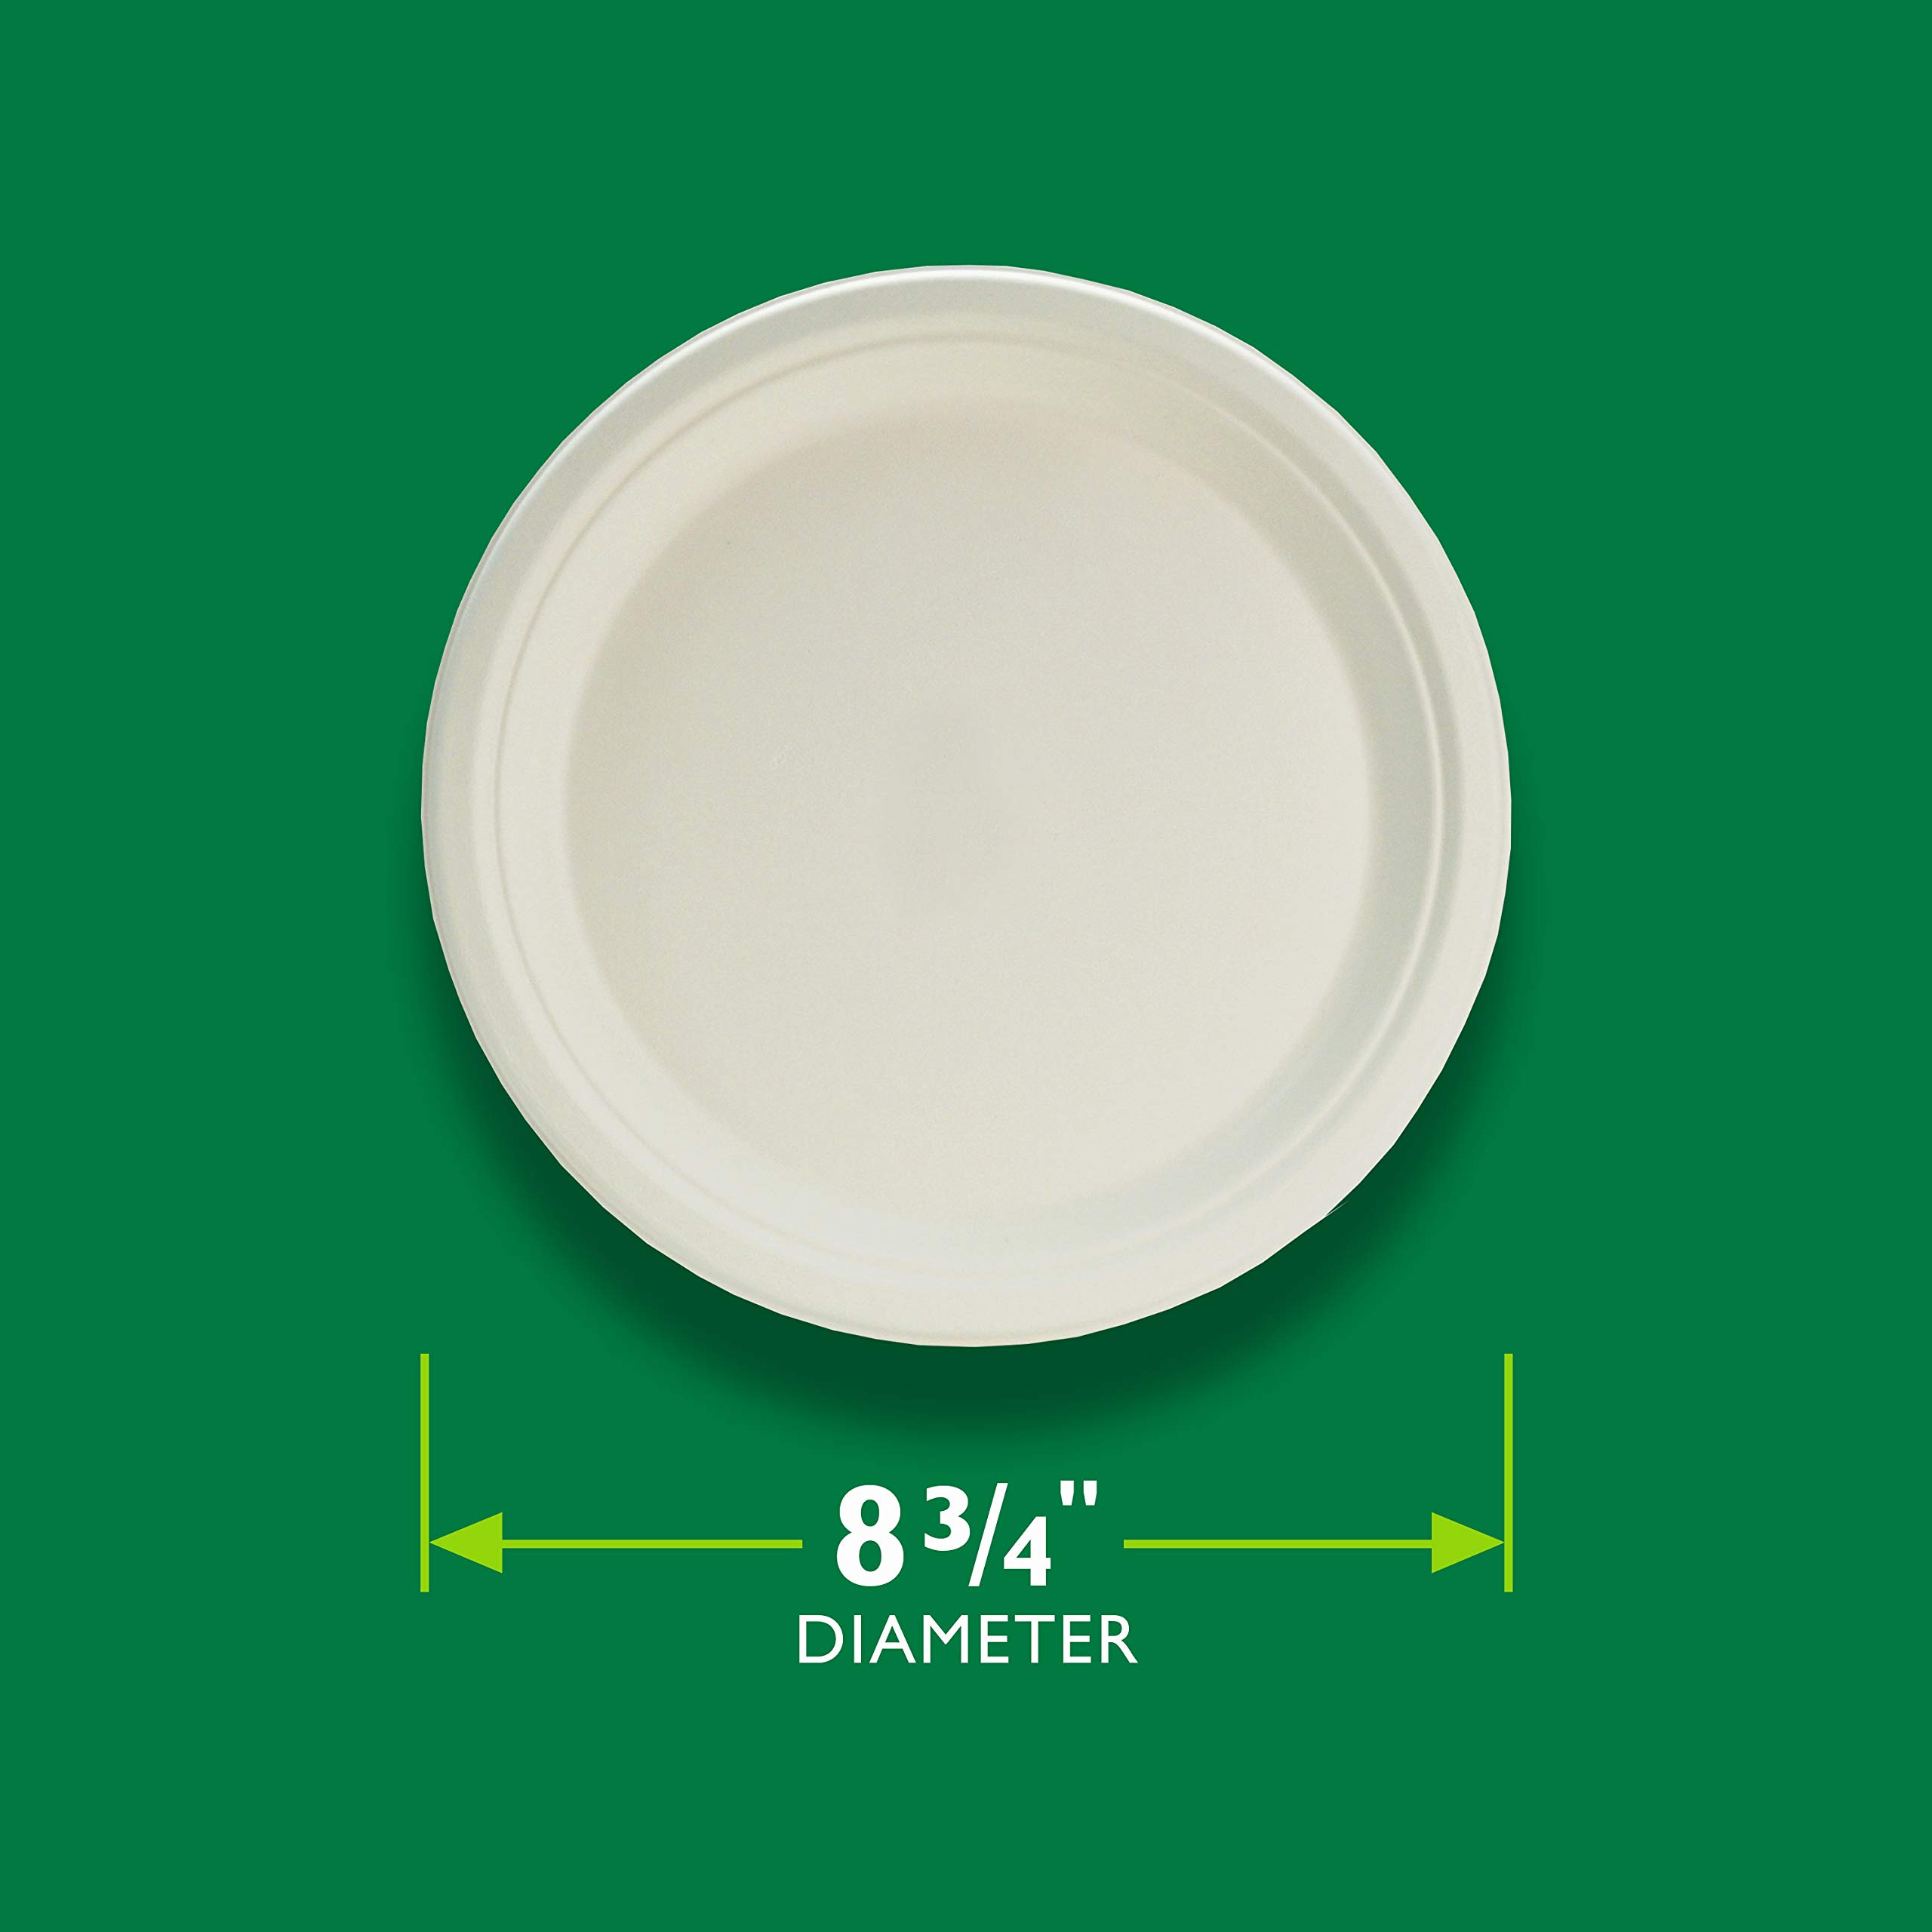 Hefty ECOSAVE Compostable Paper Plates (Pack of 2) - image 2 of 7